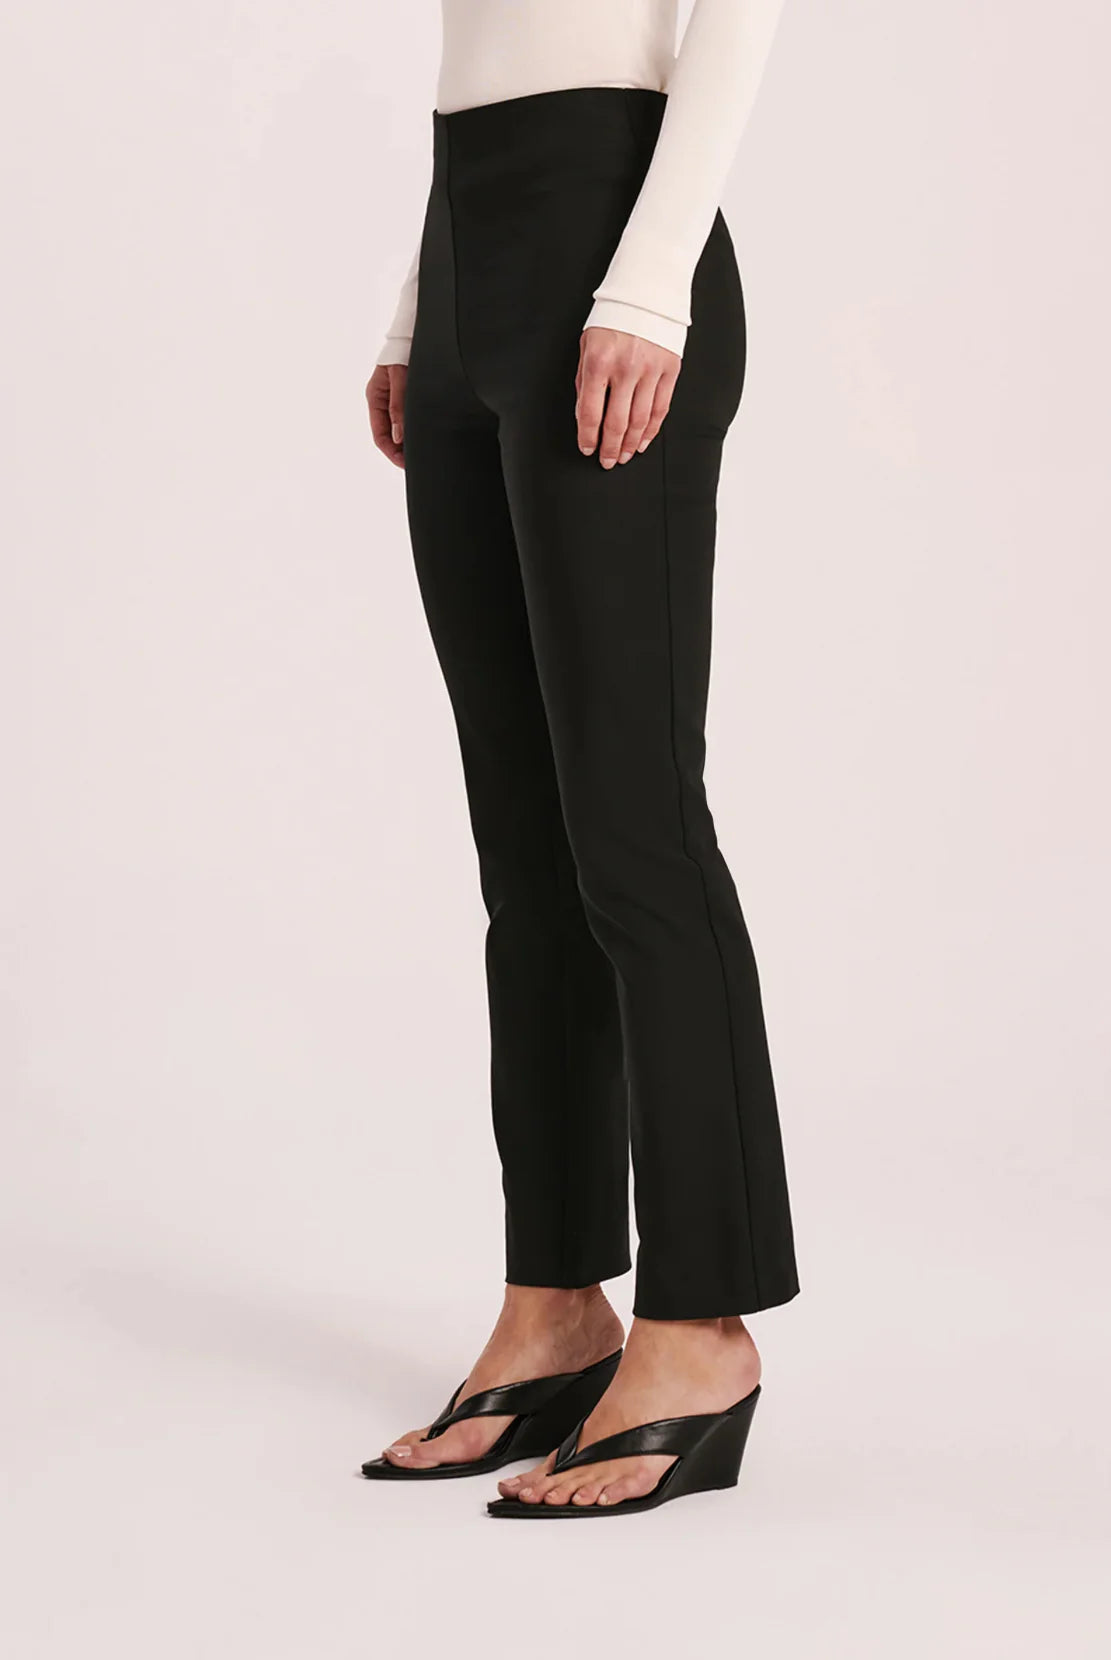 Nude Lucy - DELYSE PANT Black